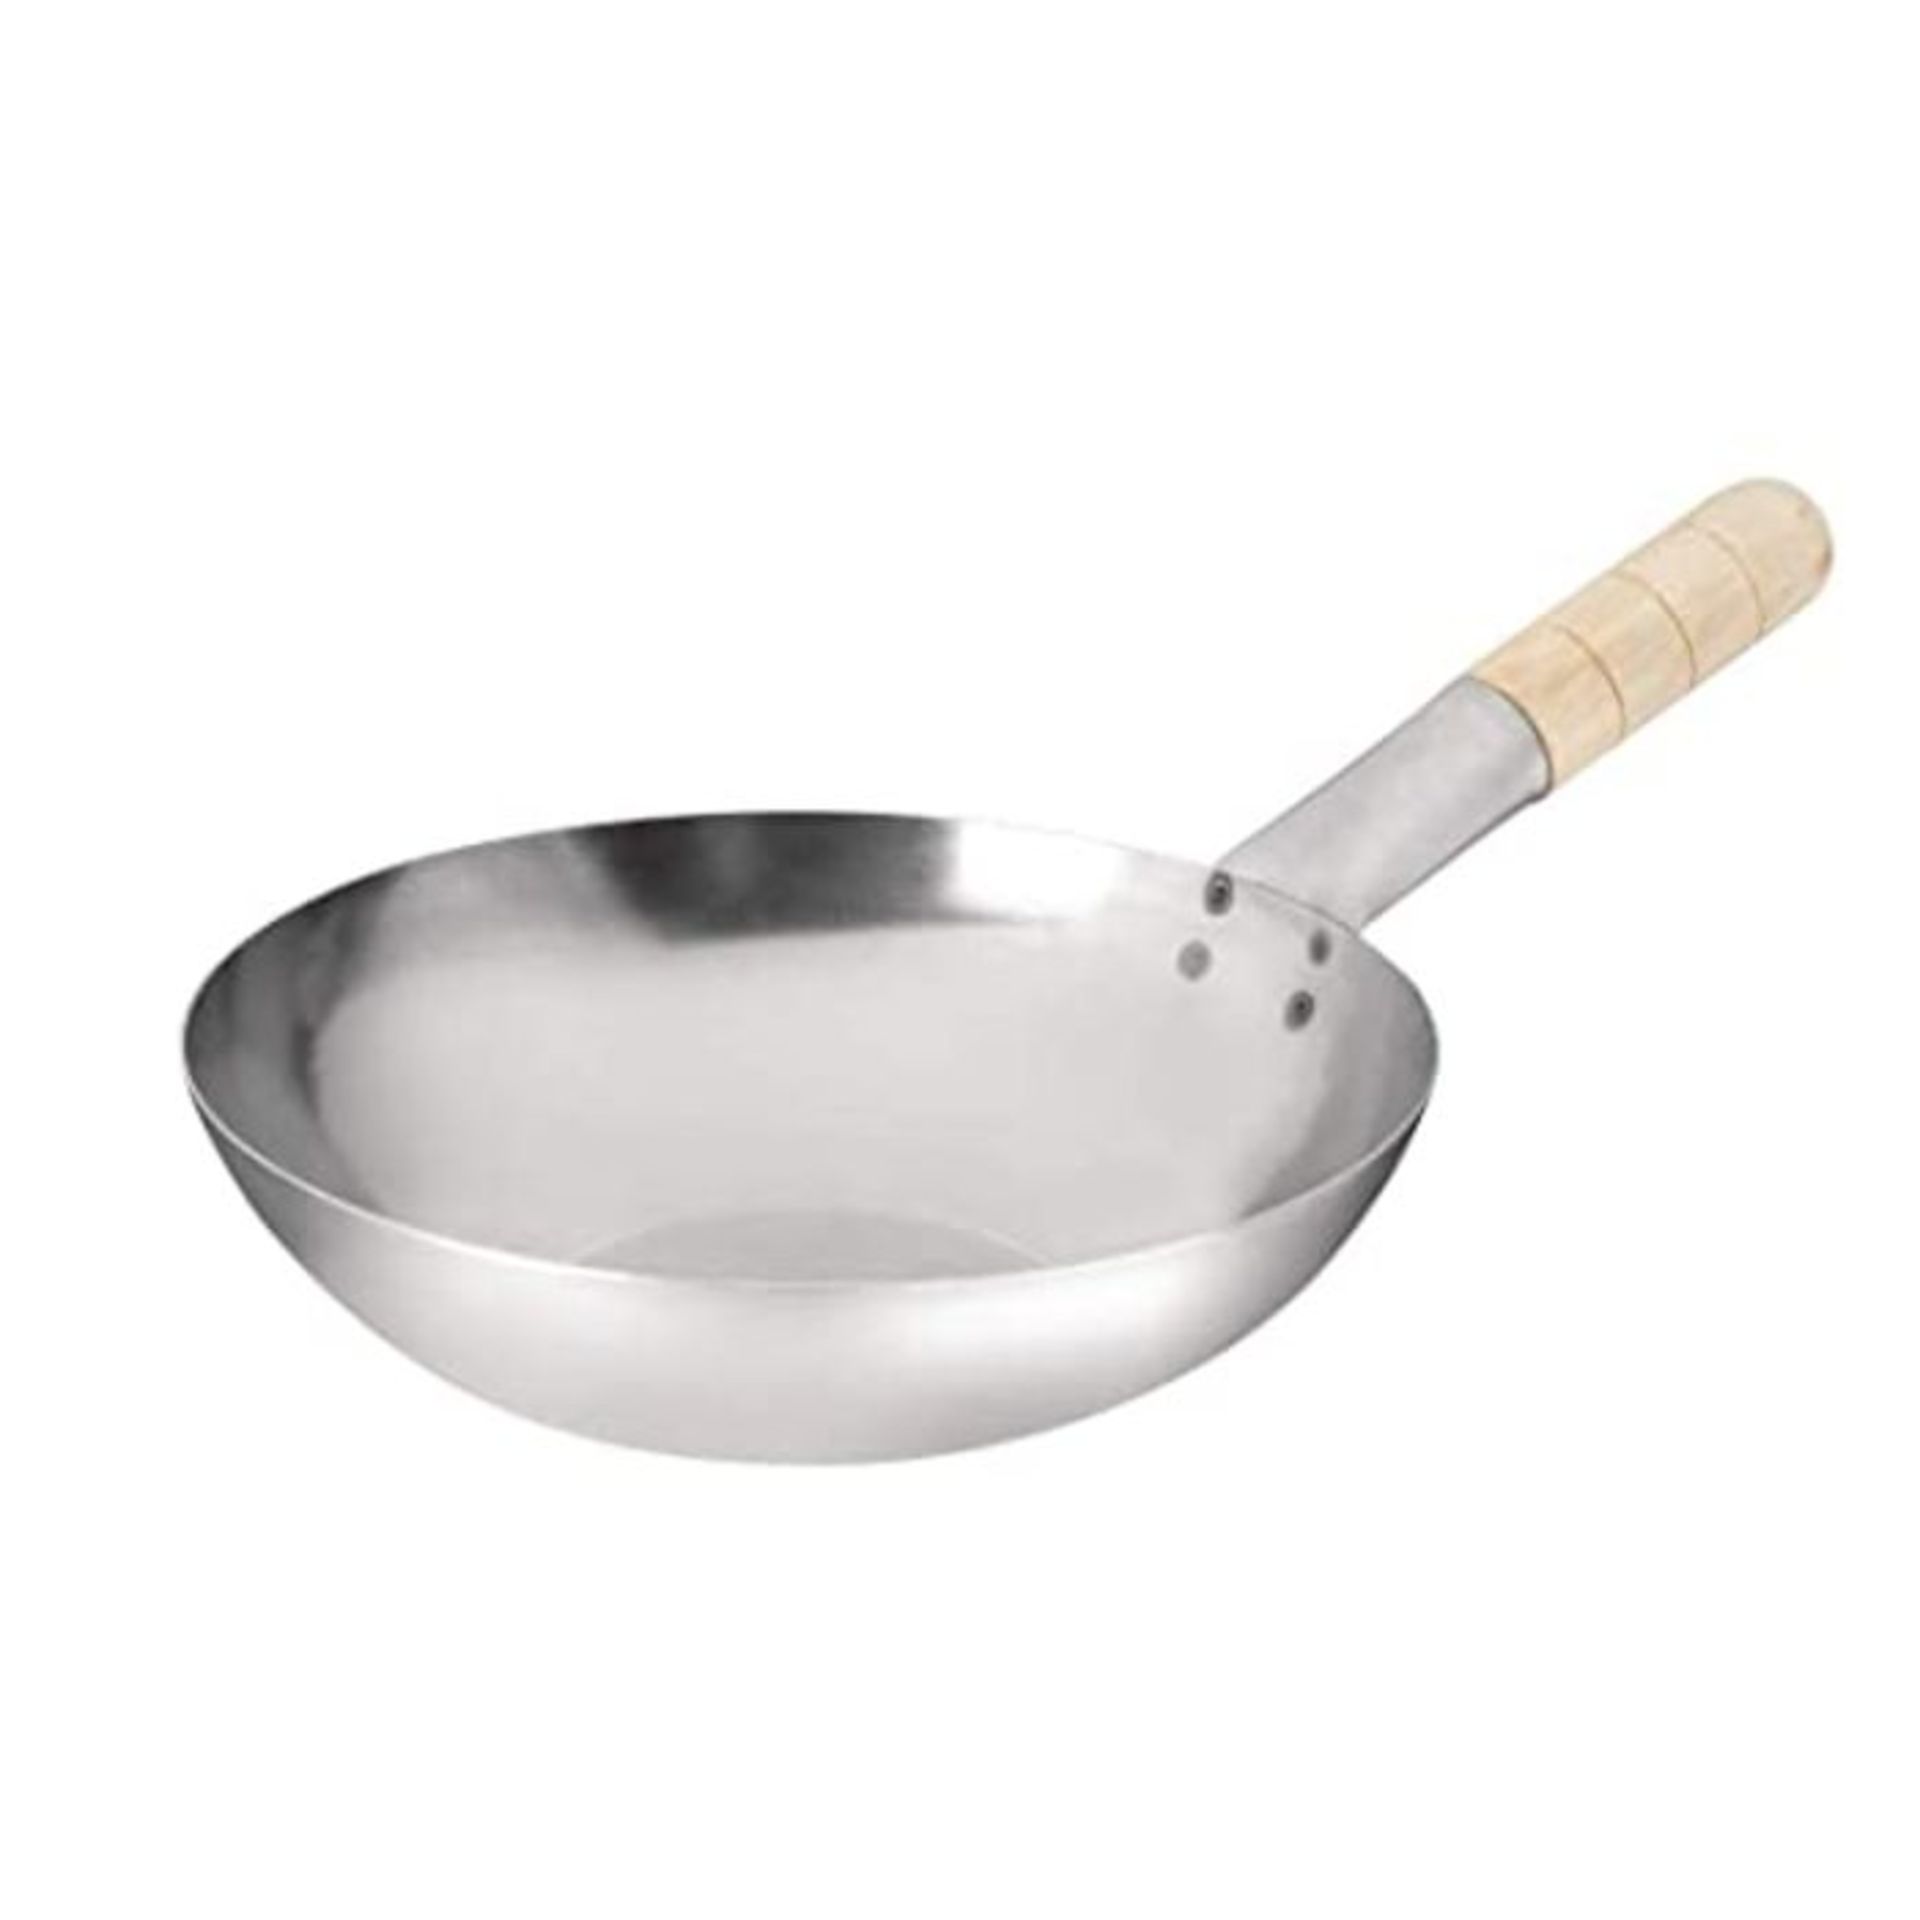 Vogue K295 Mild Steel Wok Flat Base 10In Frying Food Commercial Cooking, Silver - Image 4 of 6